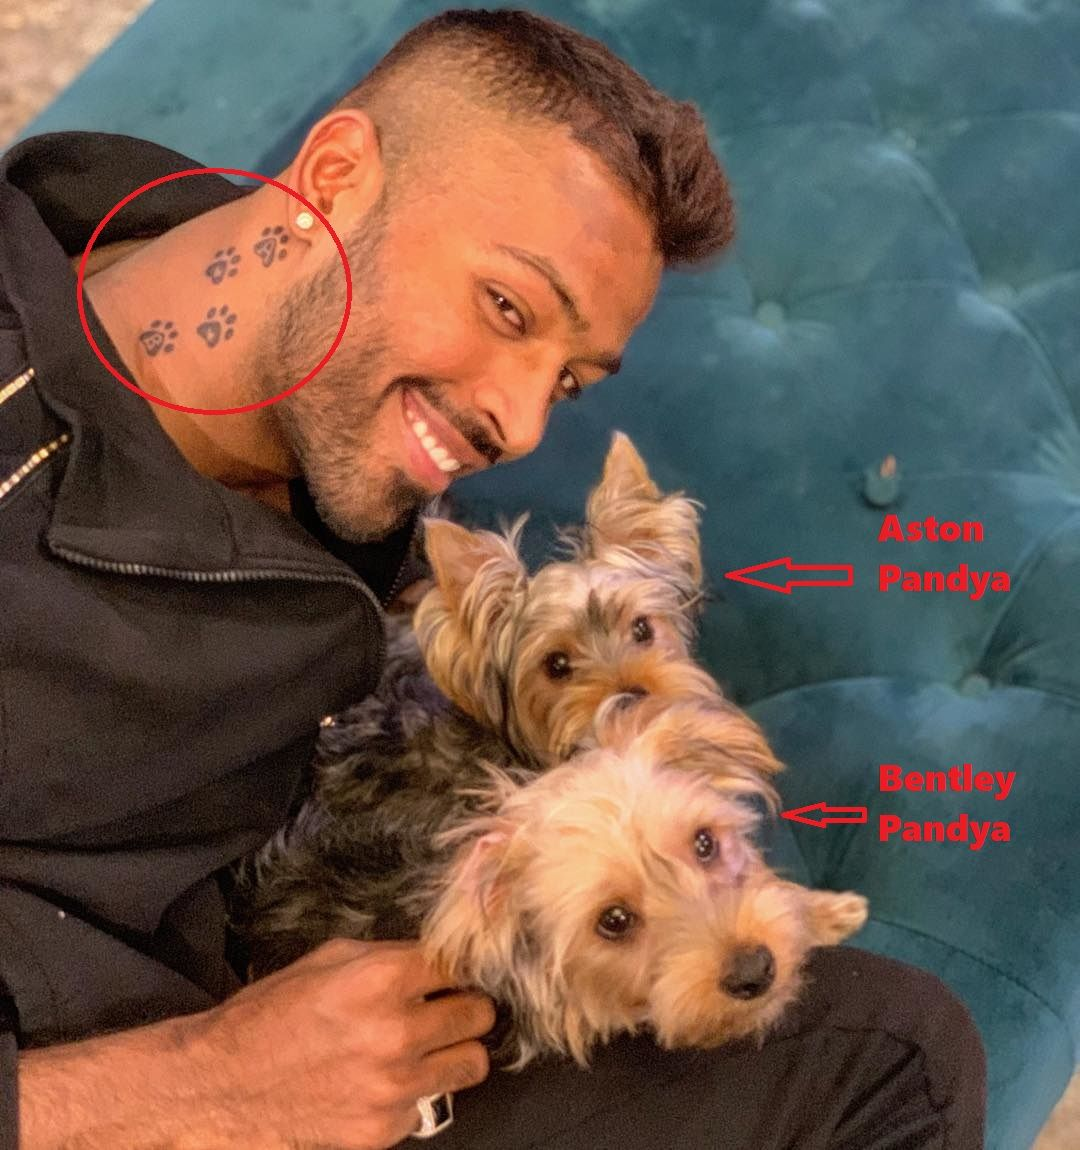 Hardik Pandya came up with a new tattoo on his neck  Stunmore